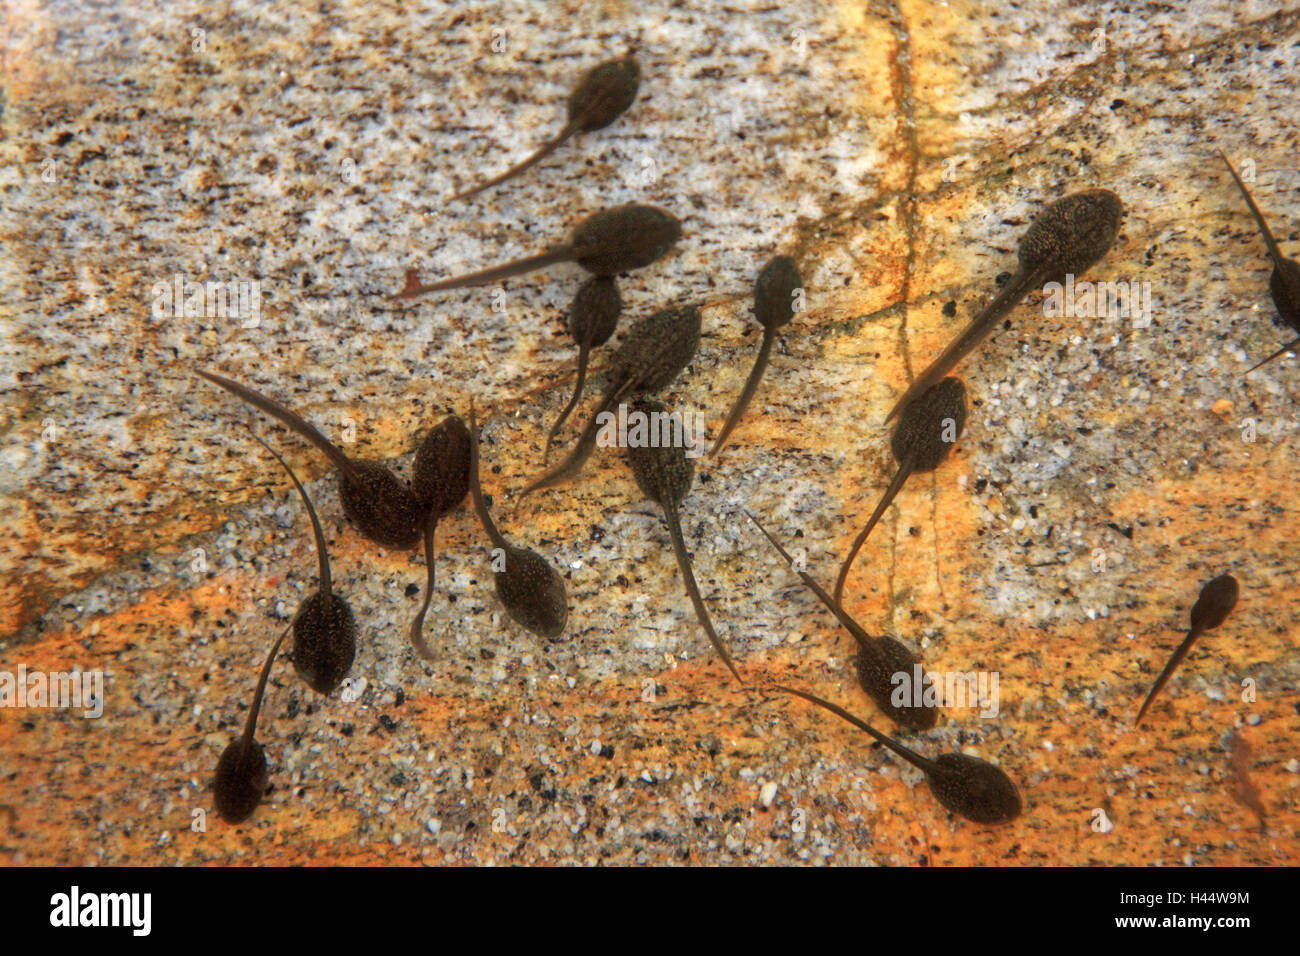 Water, tadpoles, from above, waters, stone, rock, animals, amphibians, Amphibians, frog Amphibians, Ranidae, frogs, larva stage, larvae, development stage, development, spring, Stock Photo